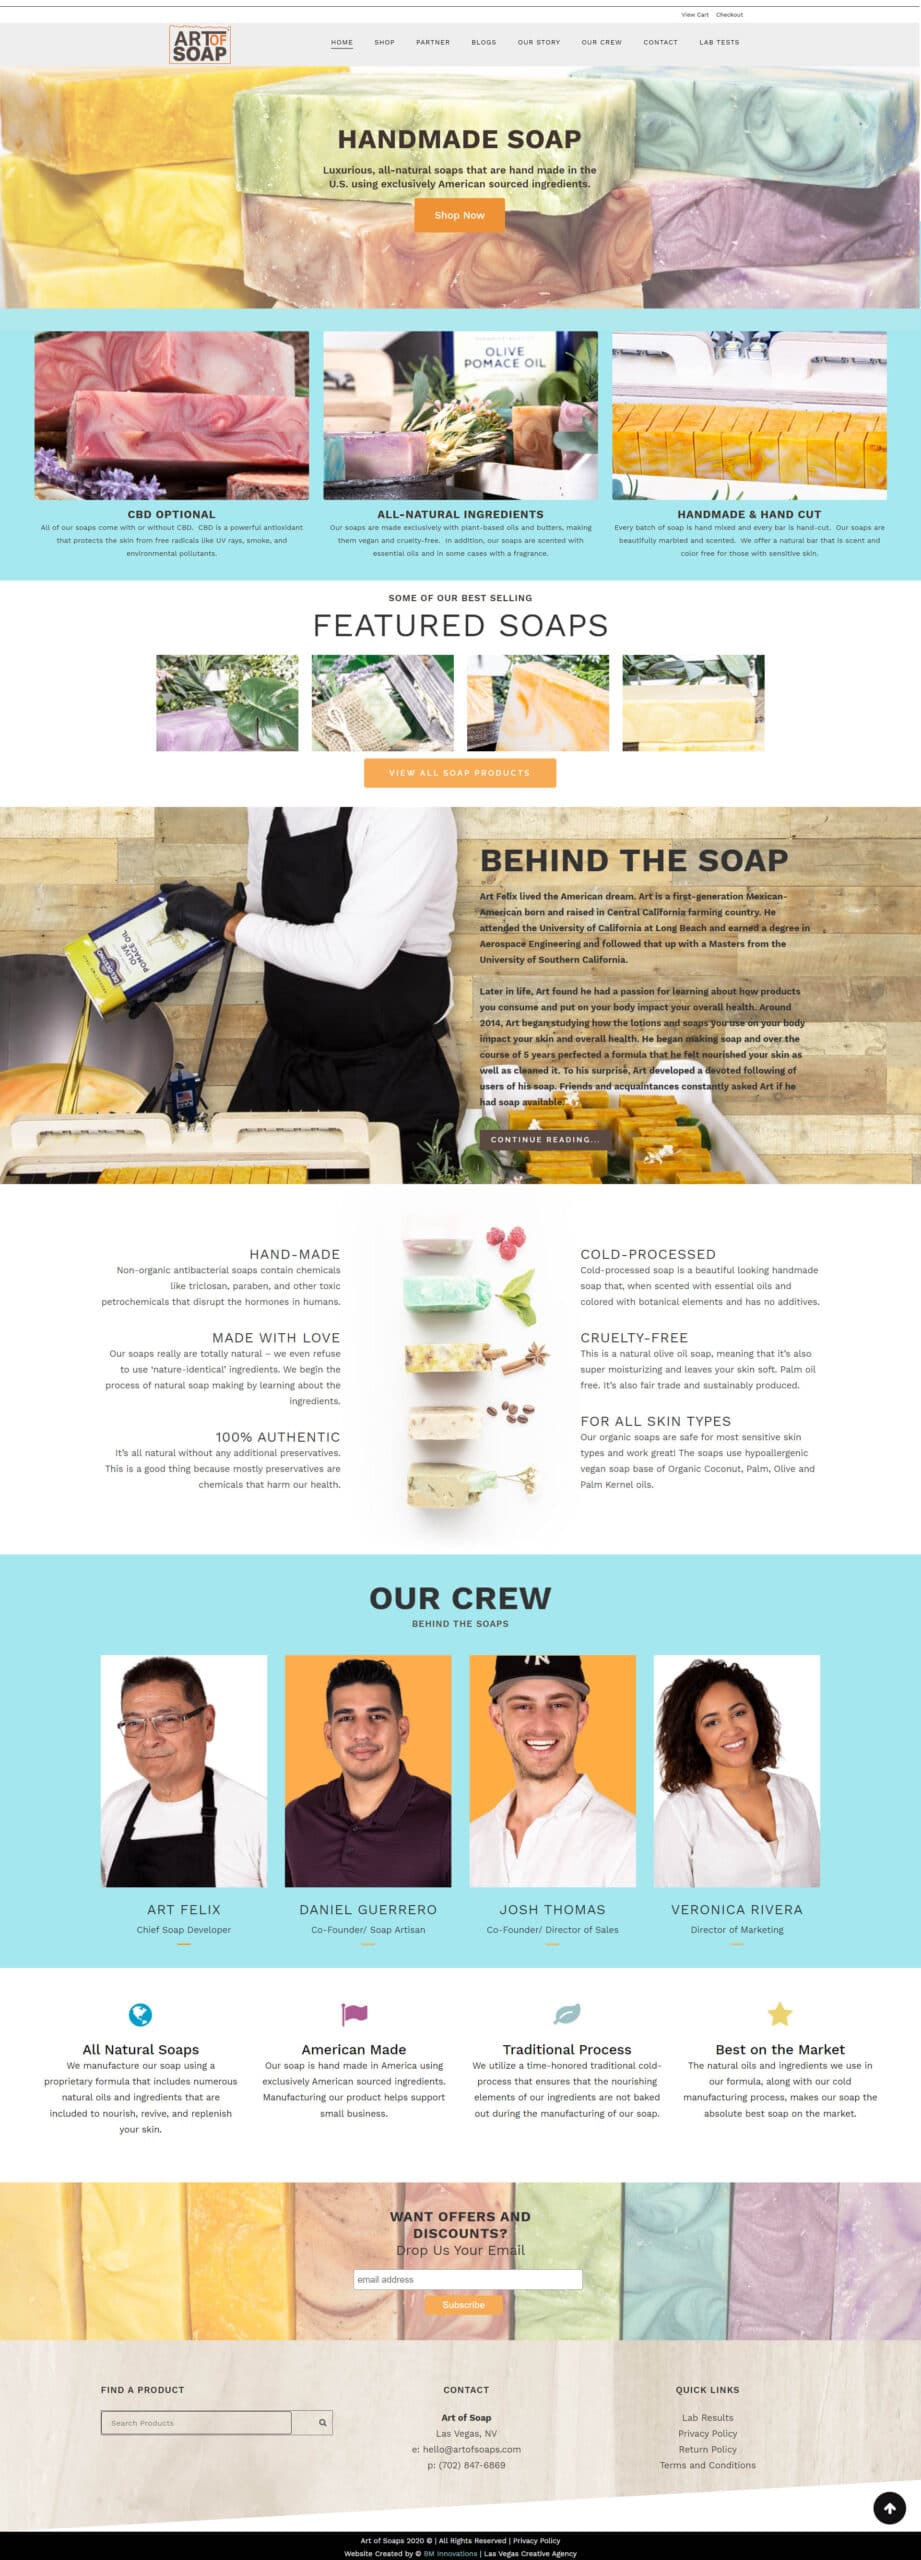 The art of soap homepage